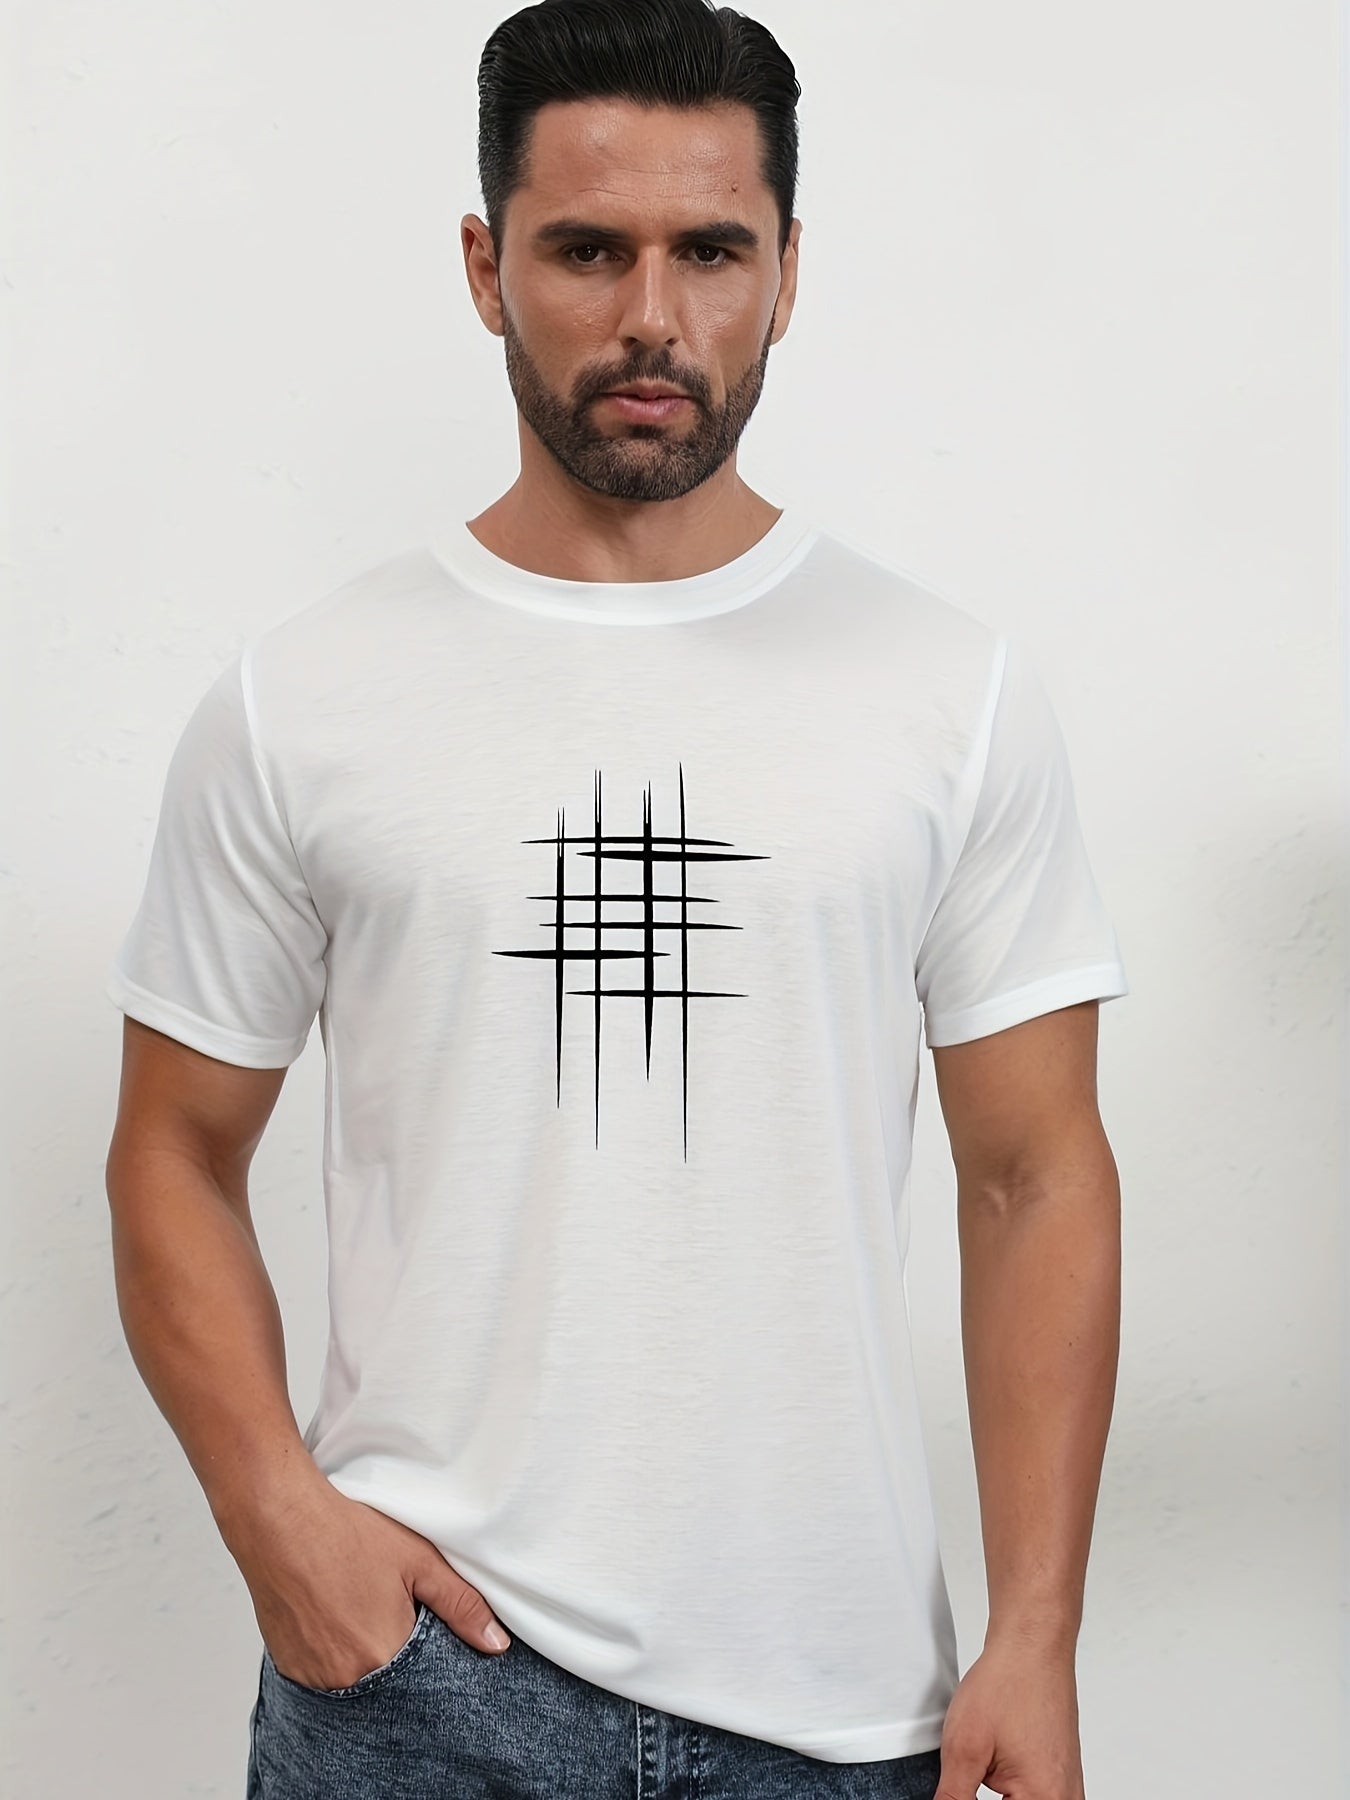 Line Cross Men's T-shirt For Summer Outdoor, Casual Slightly Stretch Crew Neck Tee Short Sleeve Graphic Stylish Clothing